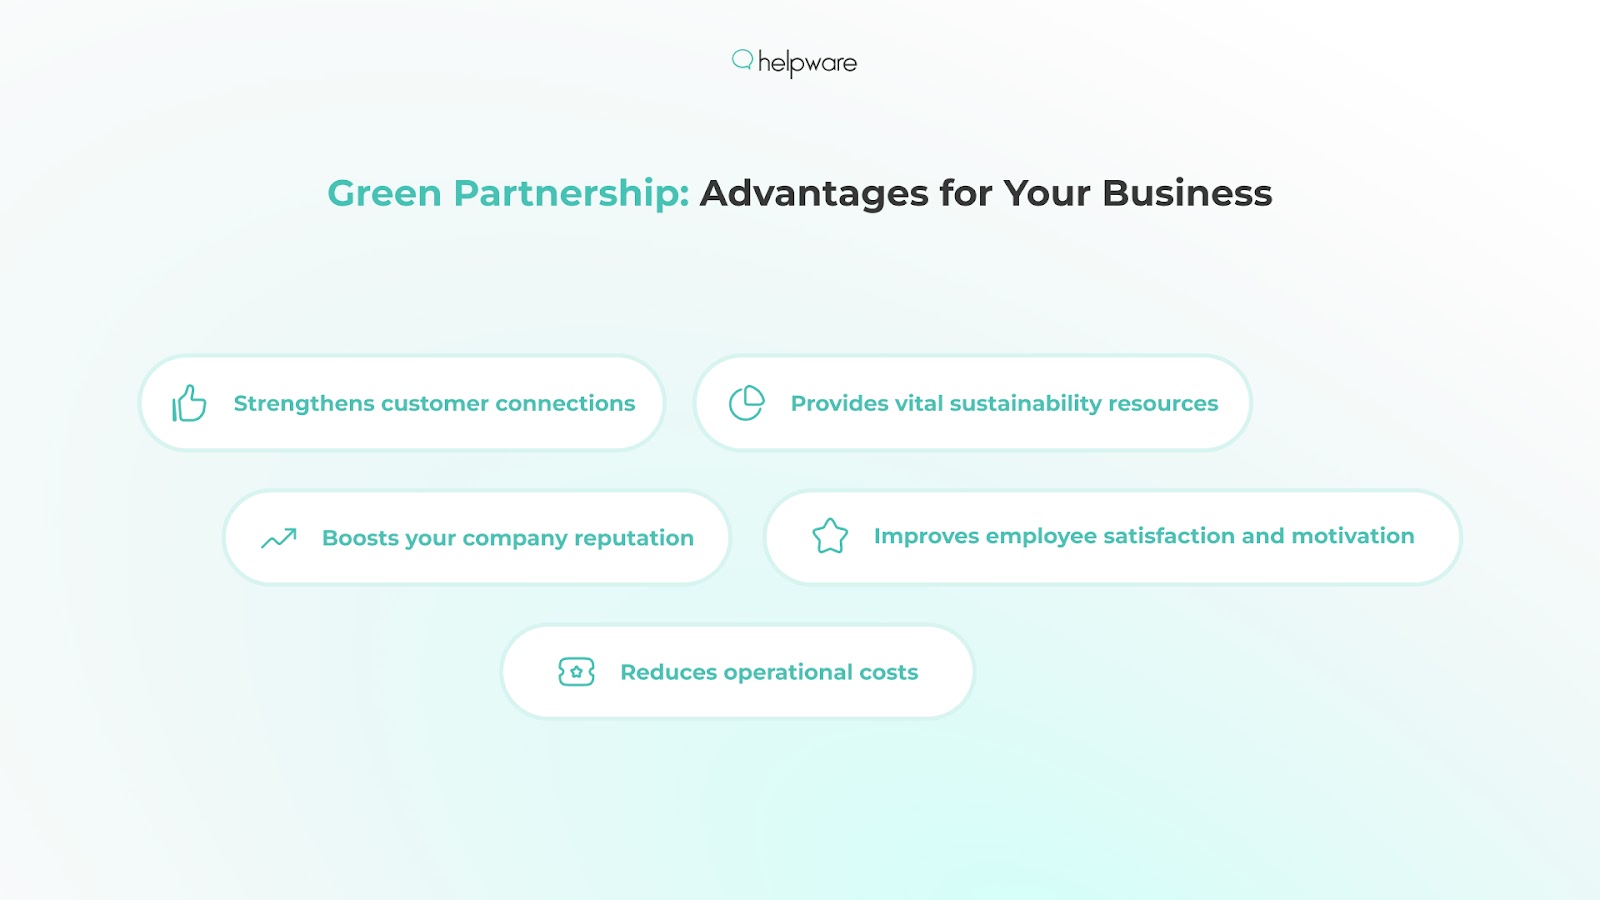 Green Partnership: Advantages for Your Business